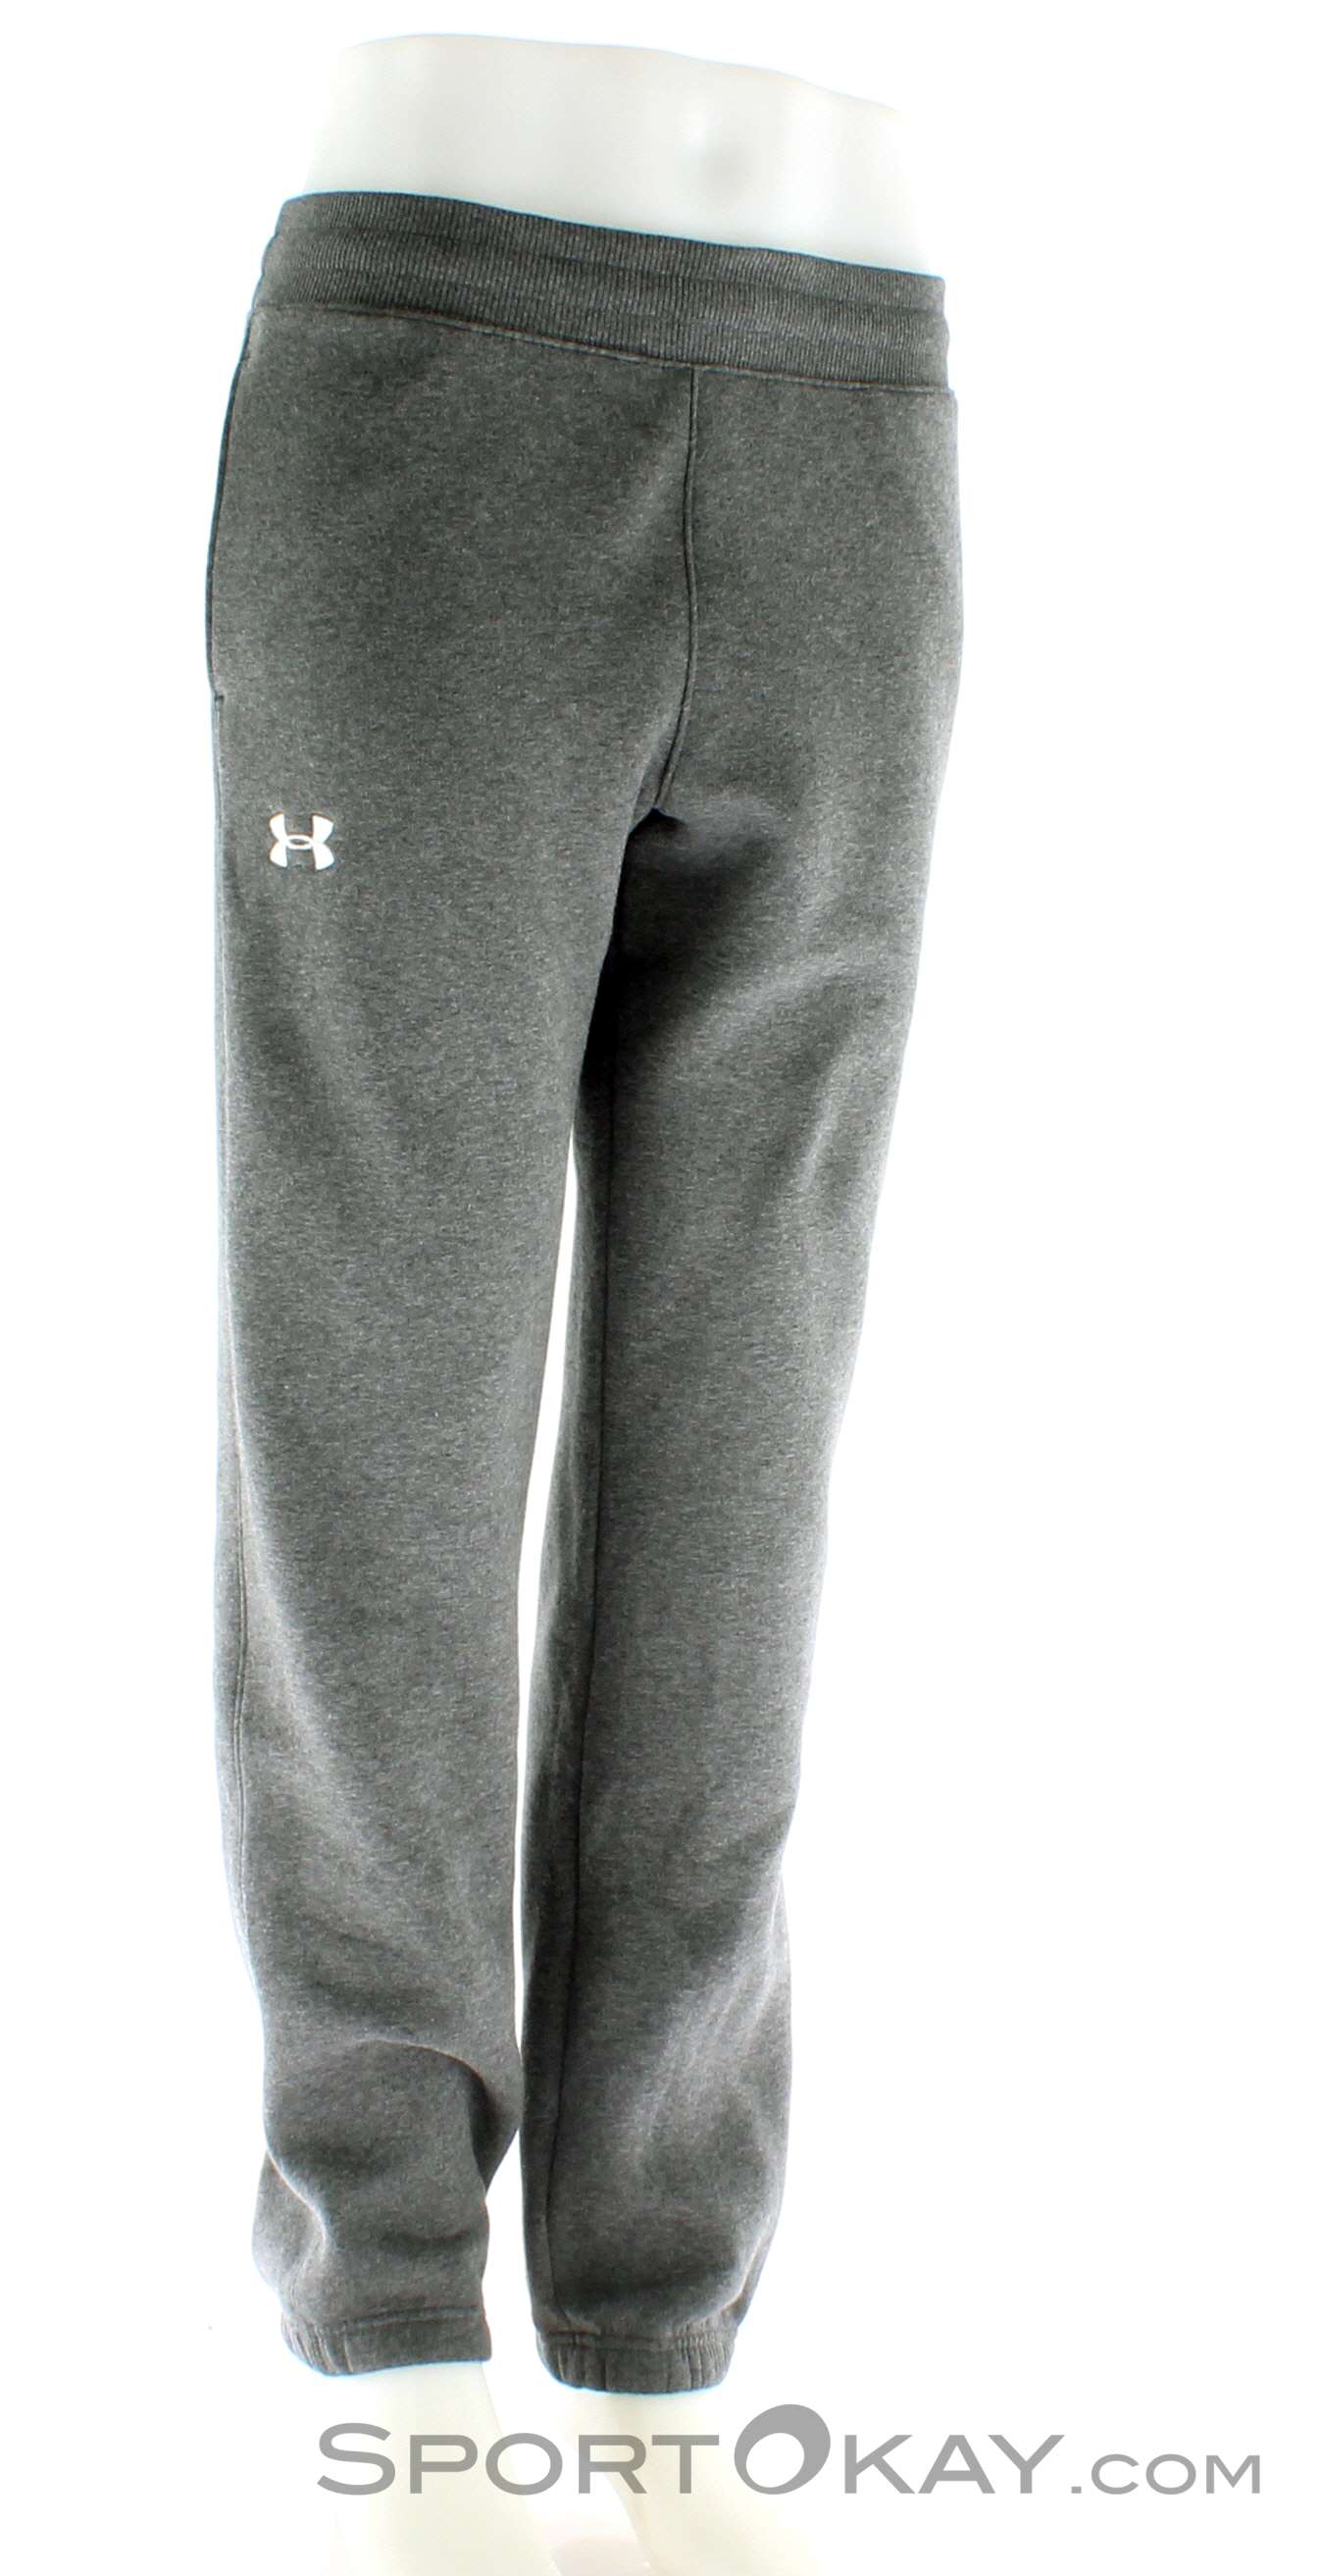 Under Armour Storm Cotton - Fitness - - Cuffed Pants Fitness Herren - Pant Trainingshose Clothing All